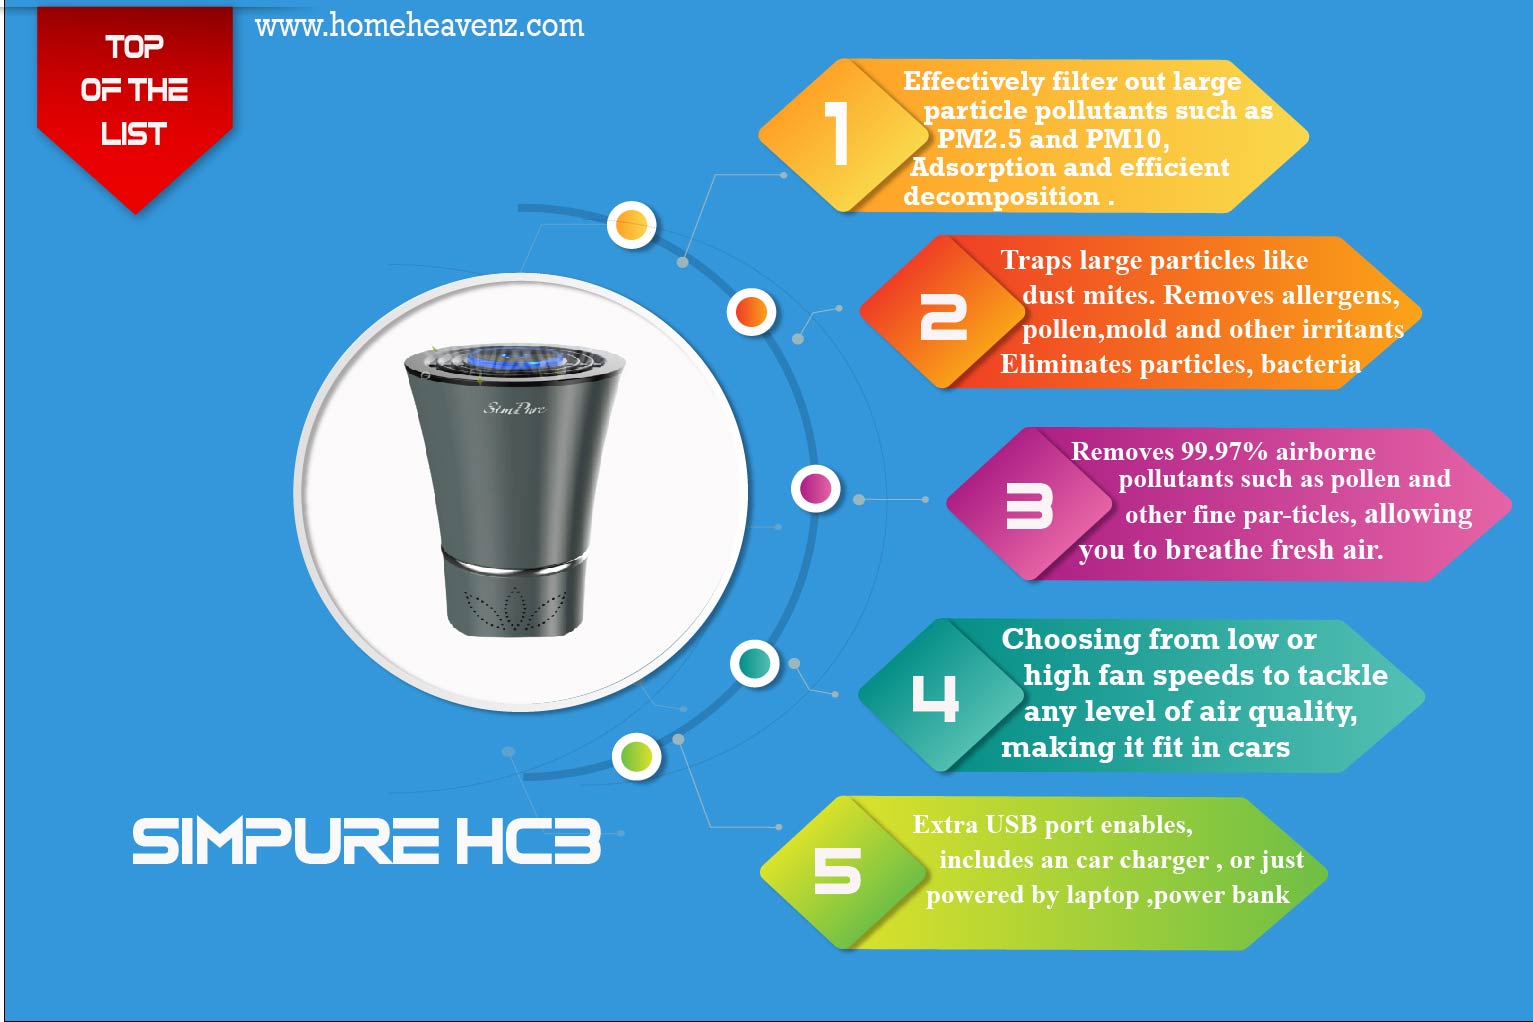 infographic-about-filtration-system-allergy removing-capability-and-fan-power-of-SimPure-HC3-360°–Best-Car-Air-Purifier-for-Smoke-2021-01